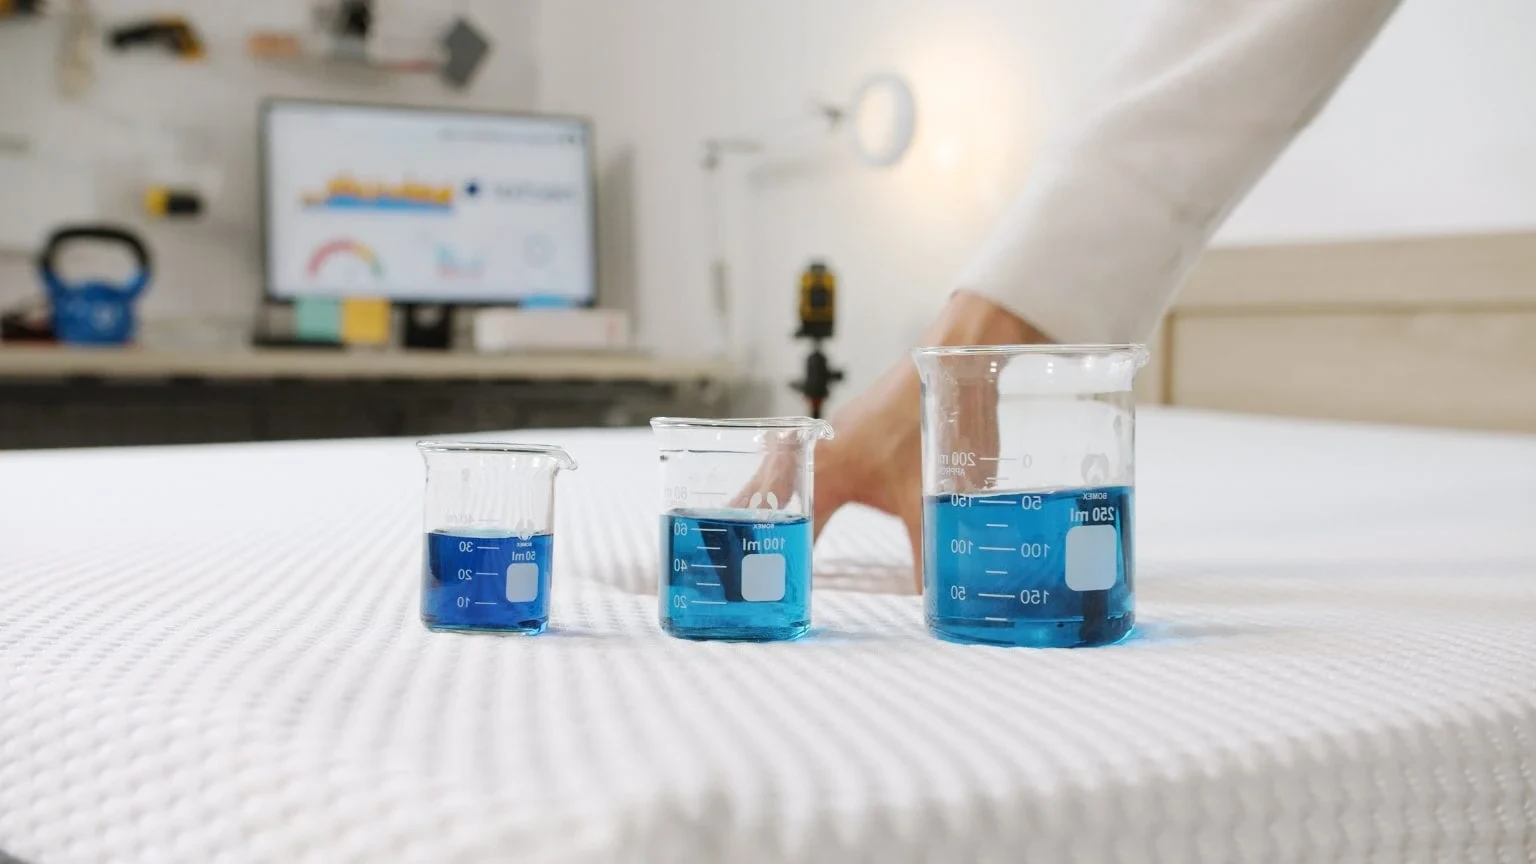 Three beakers filled with blue liquid on the top of a bed